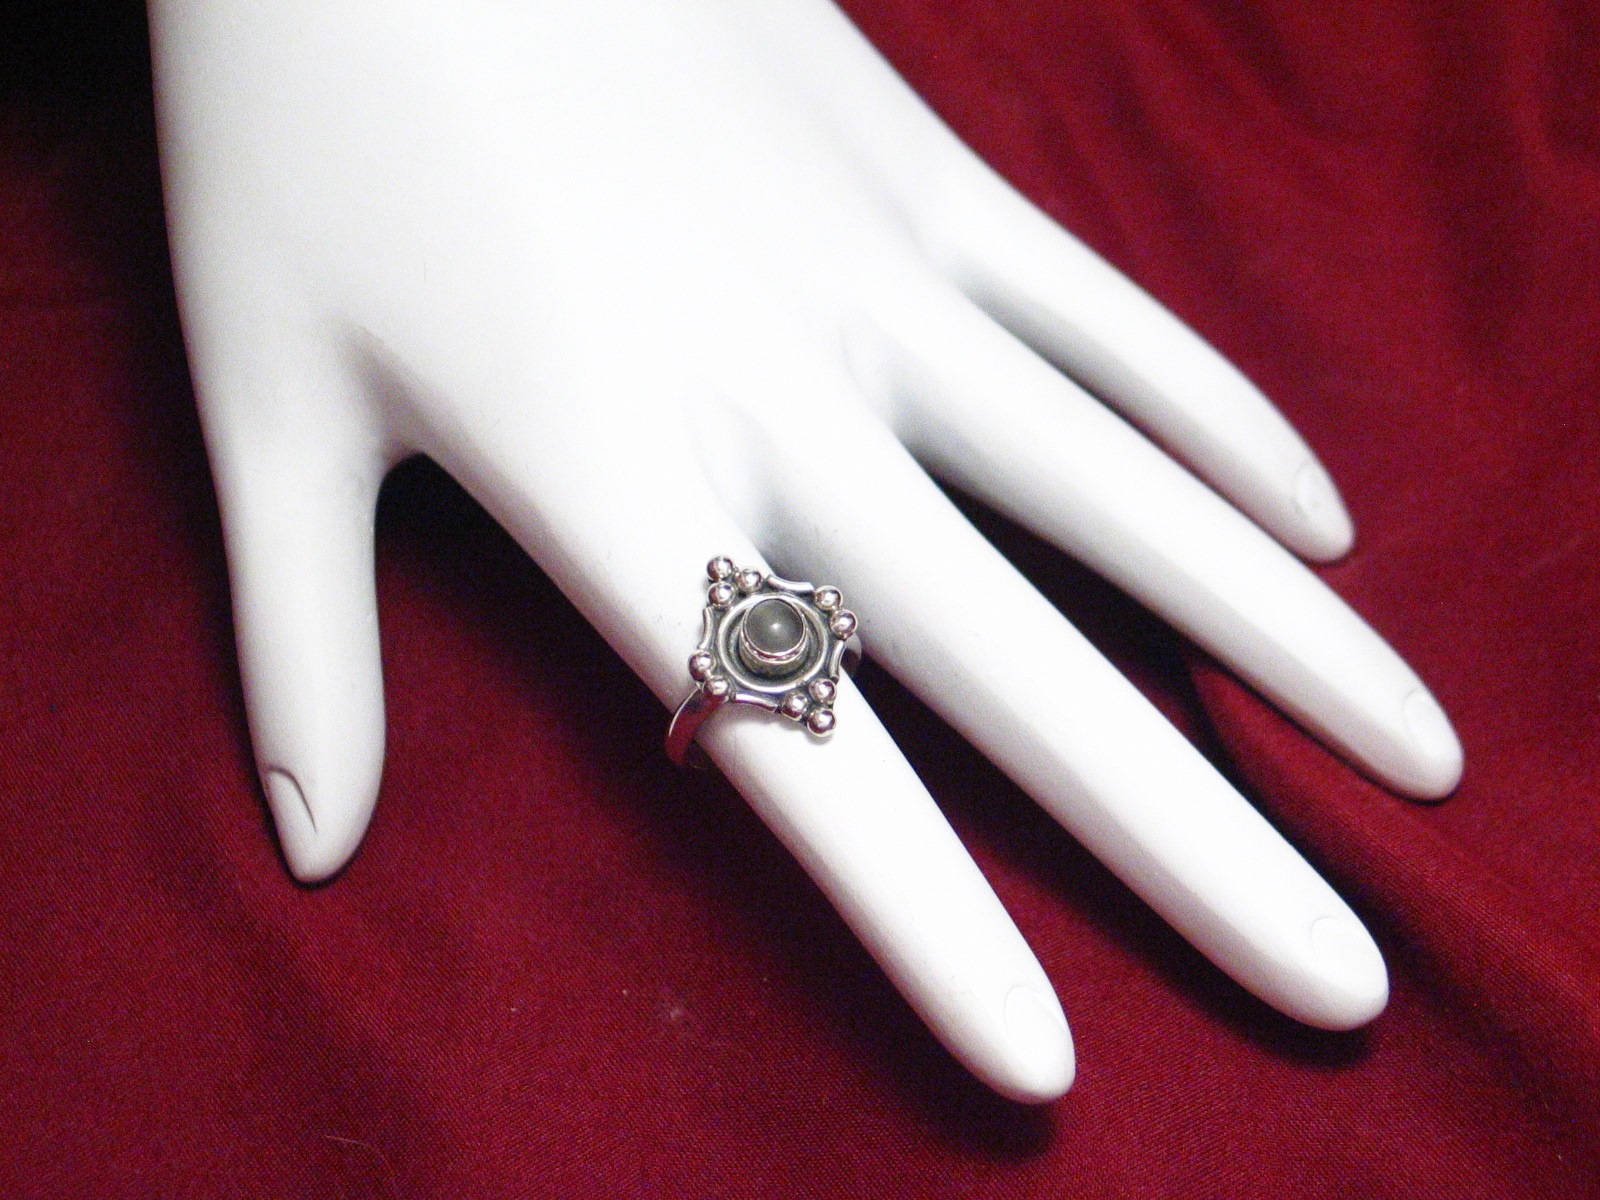 Rings | Vintage Sterling Silver Ring with Stone 5.75 |  Blingschlingers Jewelry